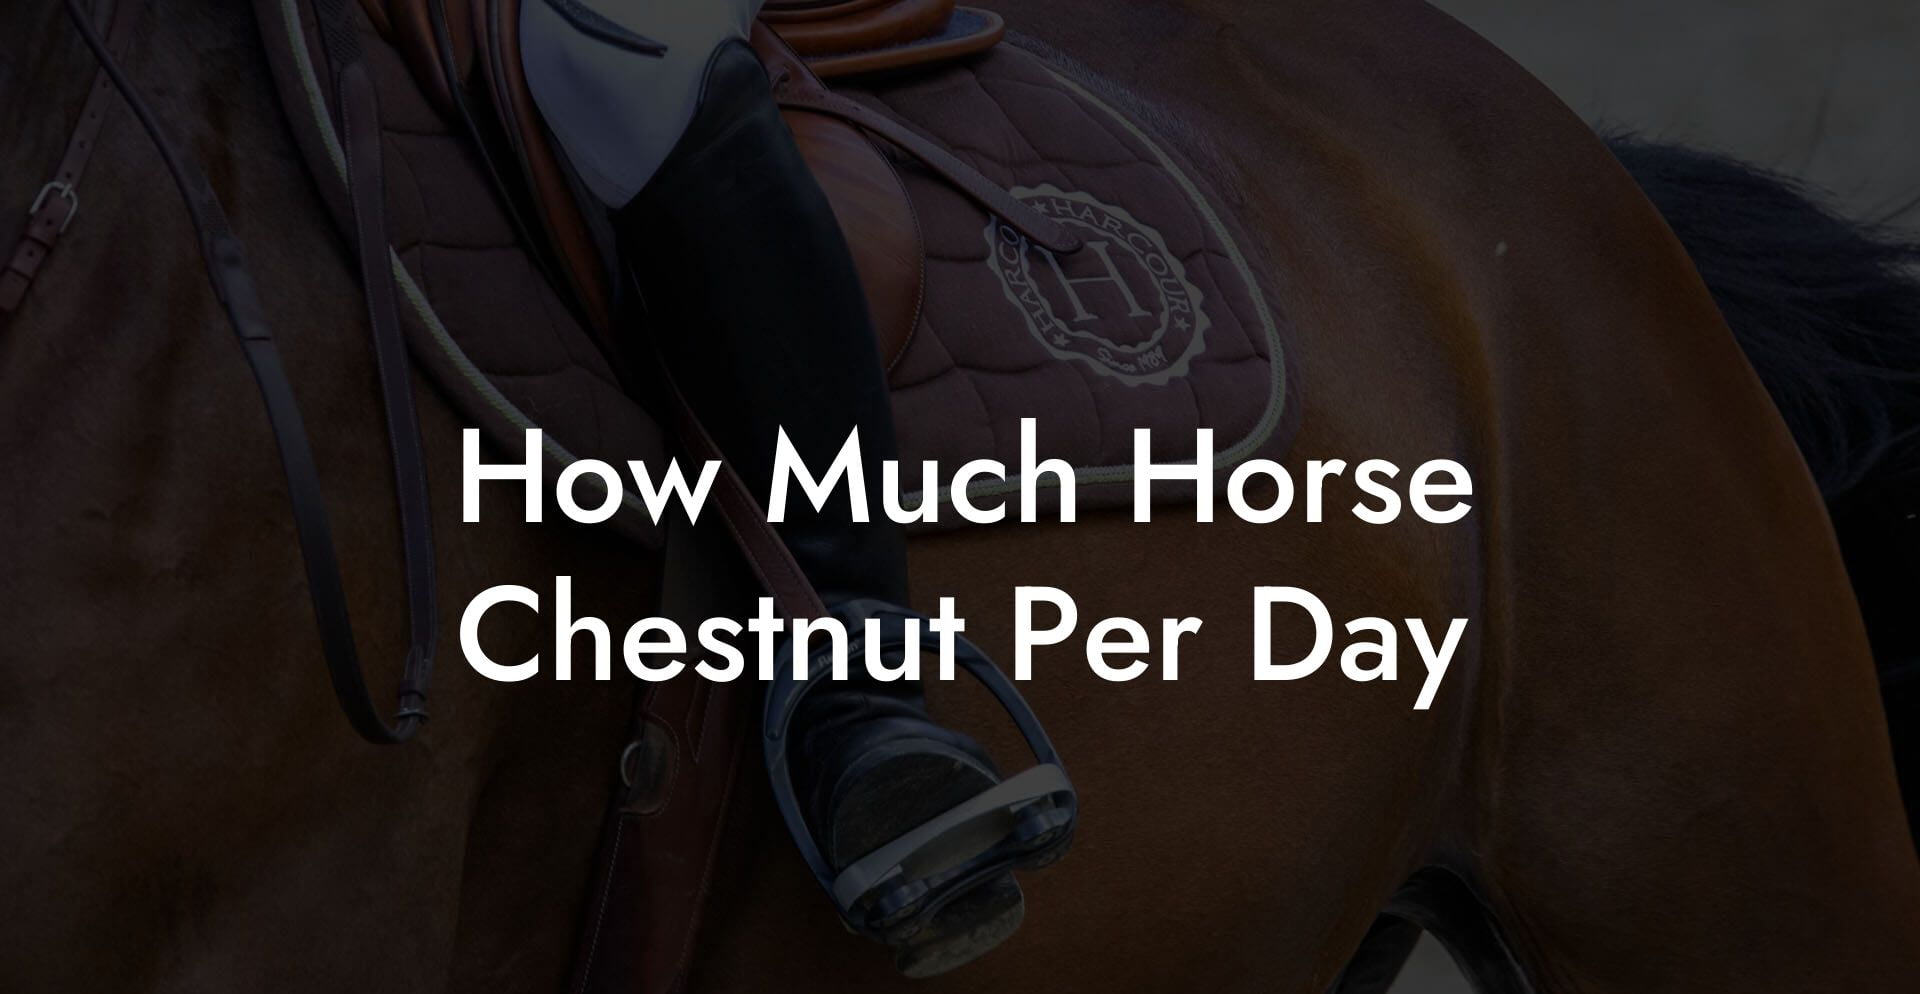 How Much Horse Chestnut Per Day